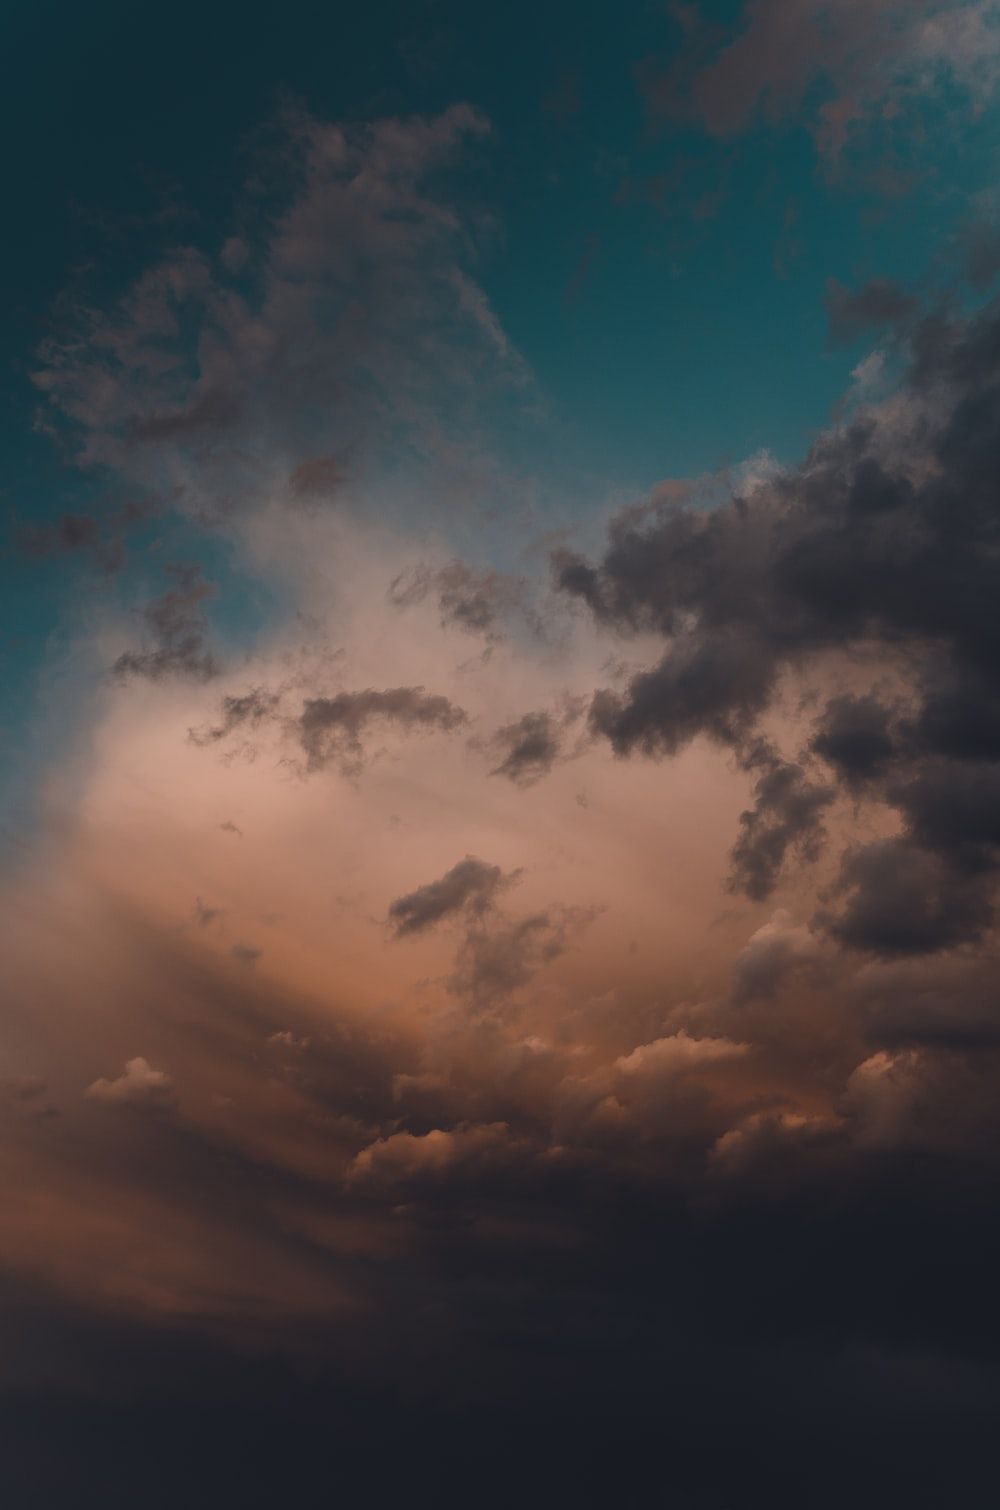 Rain Clouds Picture. Download Free Image